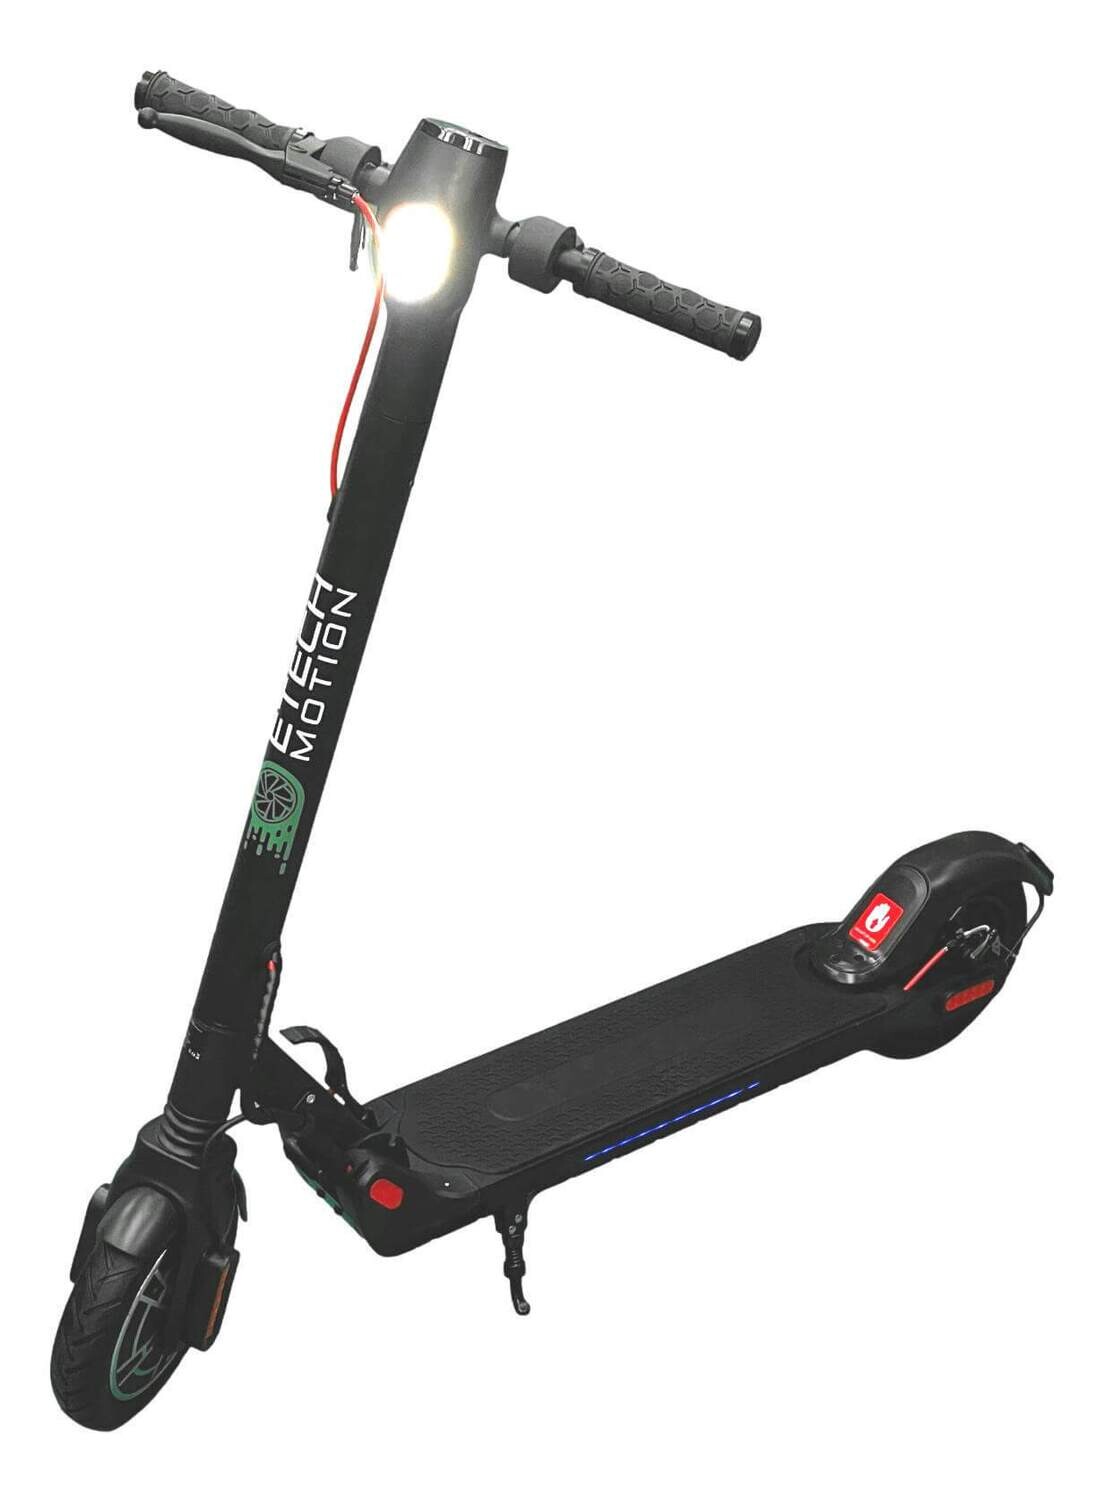 M5 Electric Scooter 8.5" 350W up to 19 mph & 18 mile range with APP